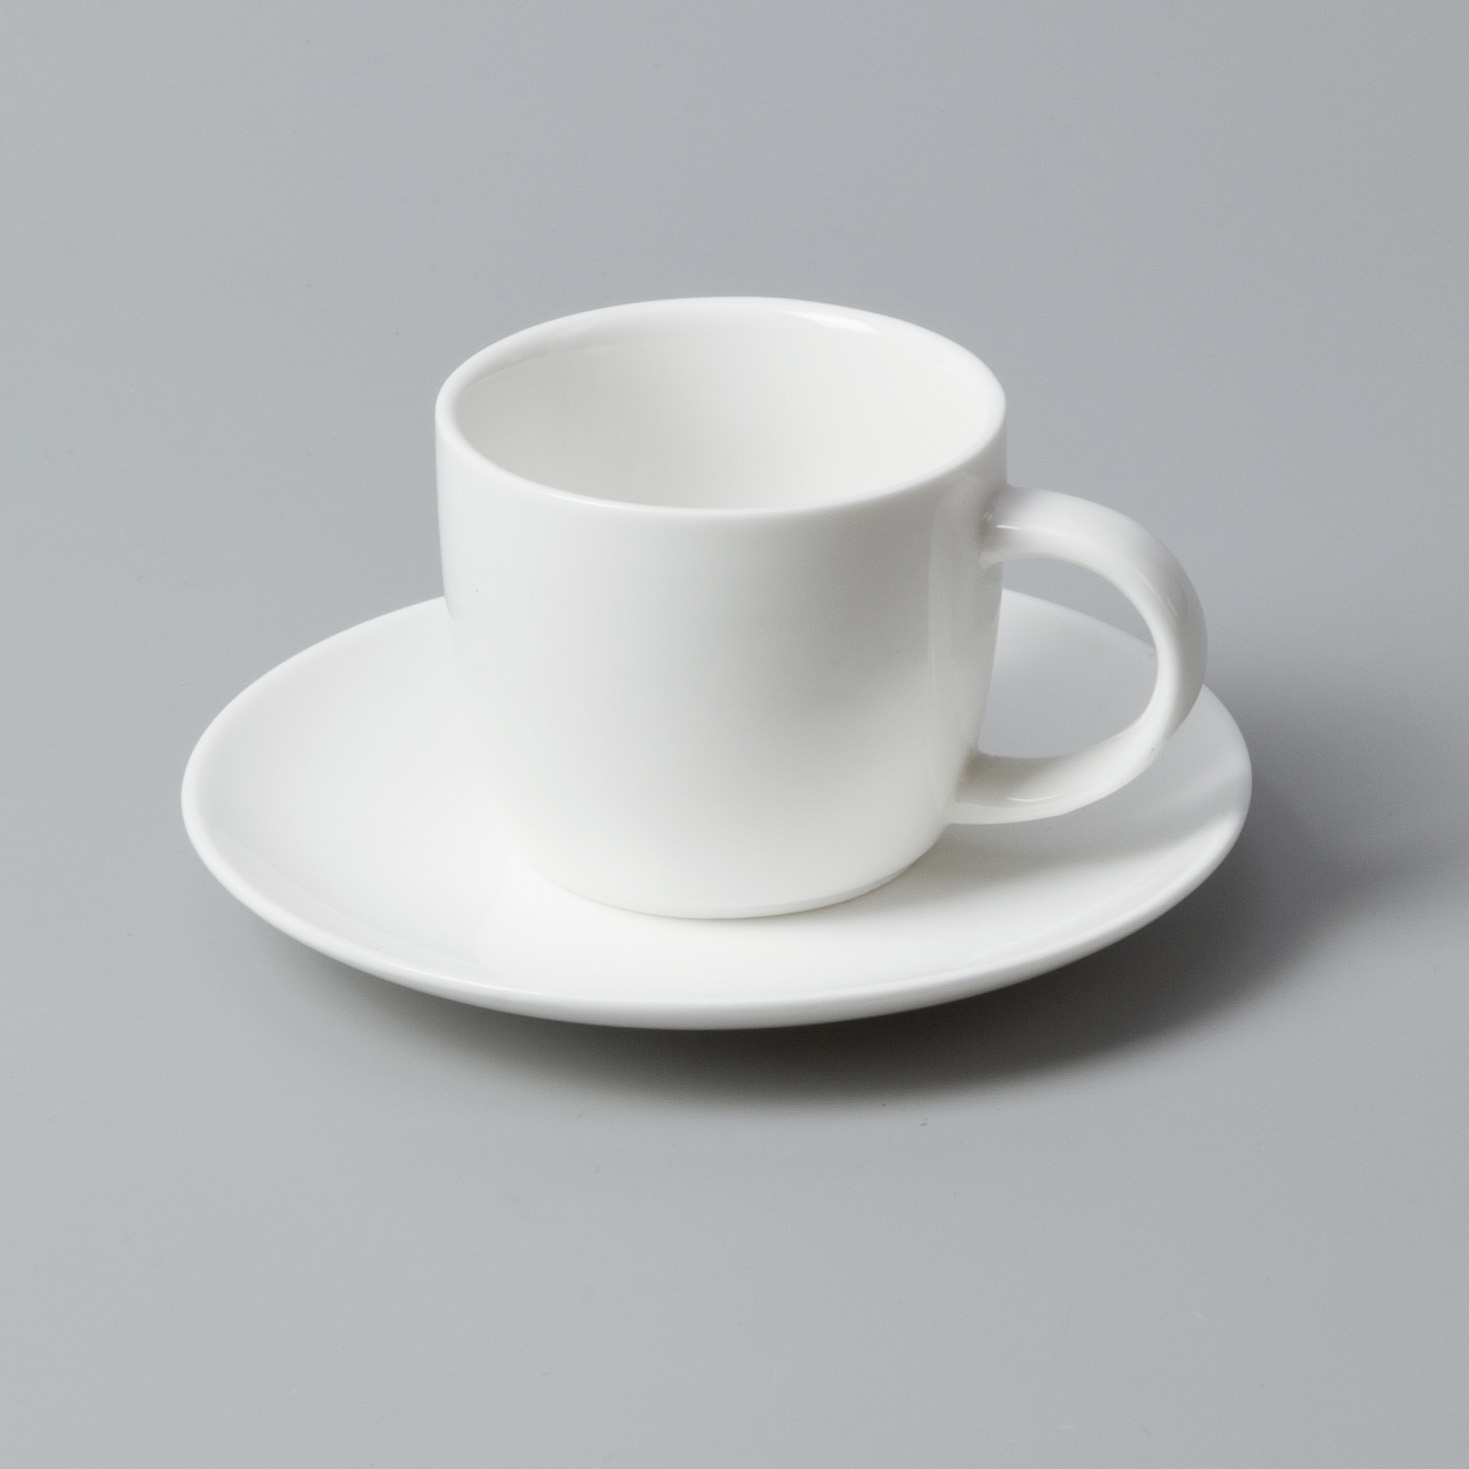 contemporary hotel crockery online india German style series for dinner-11